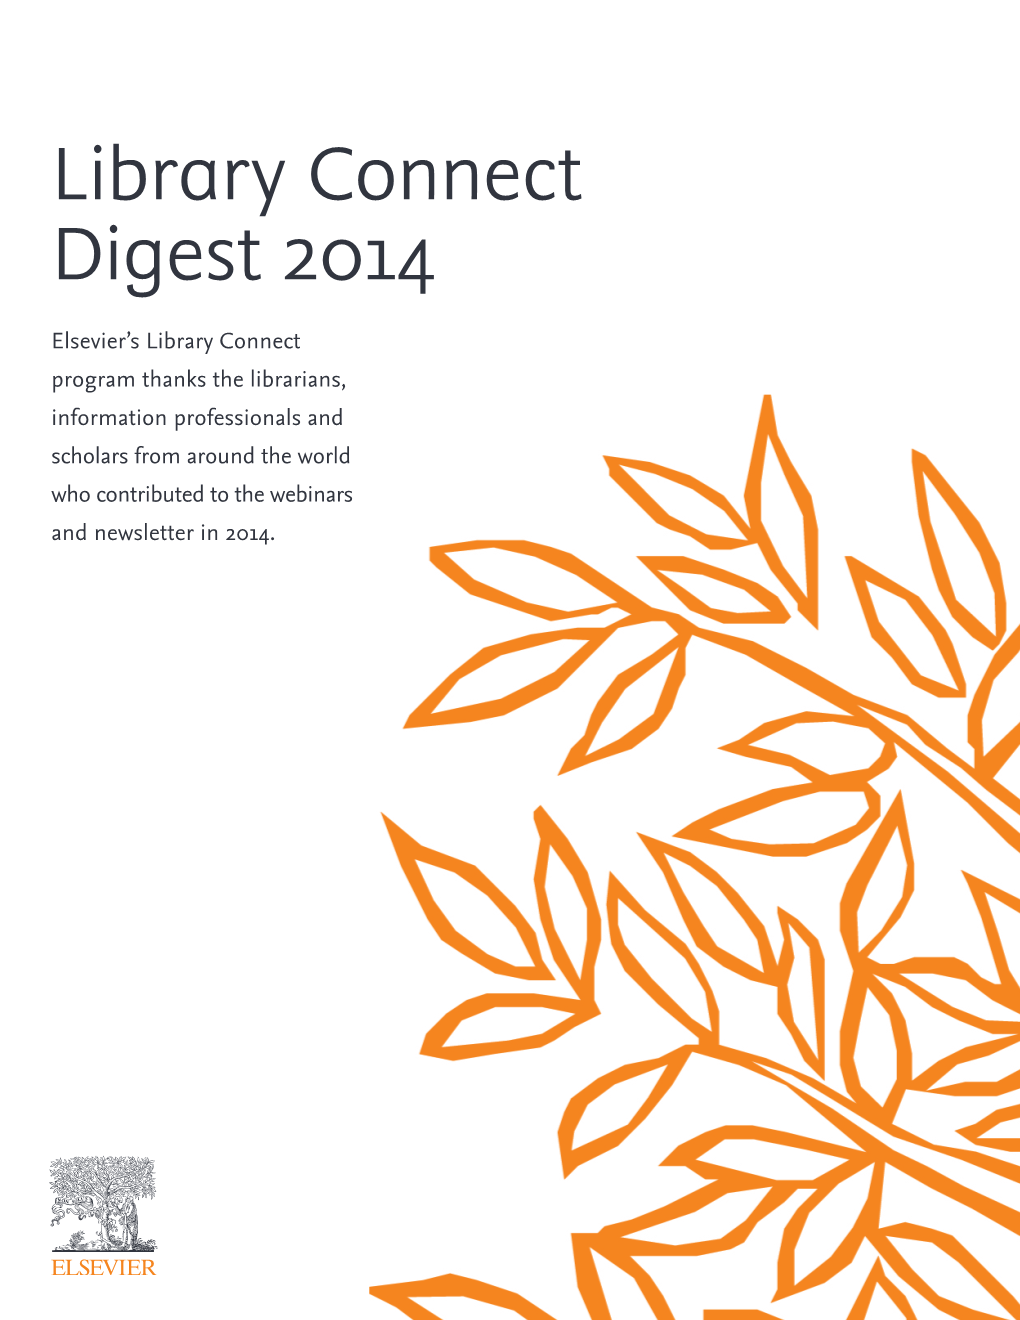 Download the Library Connect Digest 2014